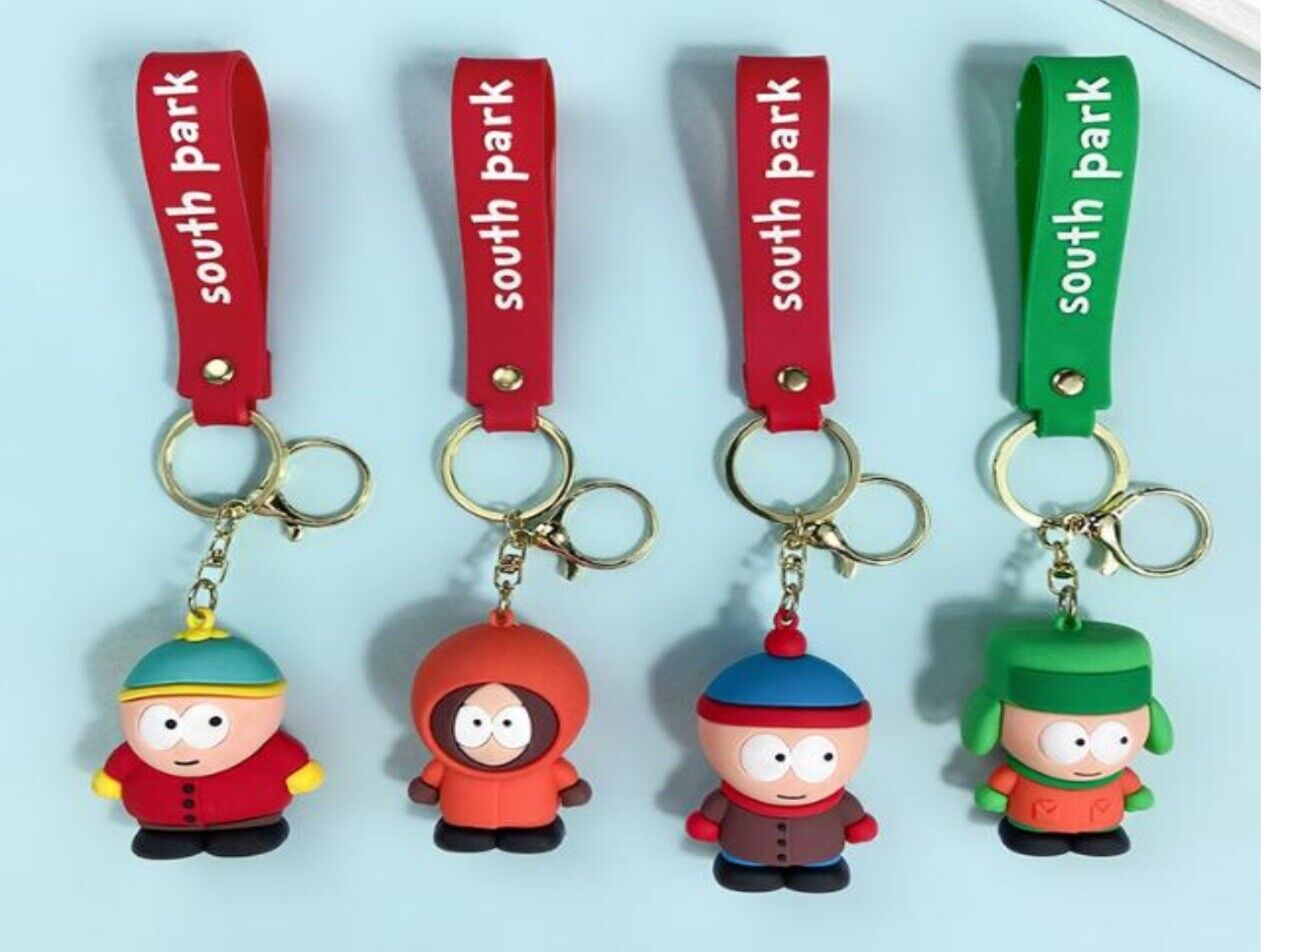 4 PCs South Park Characters Keychains For $15